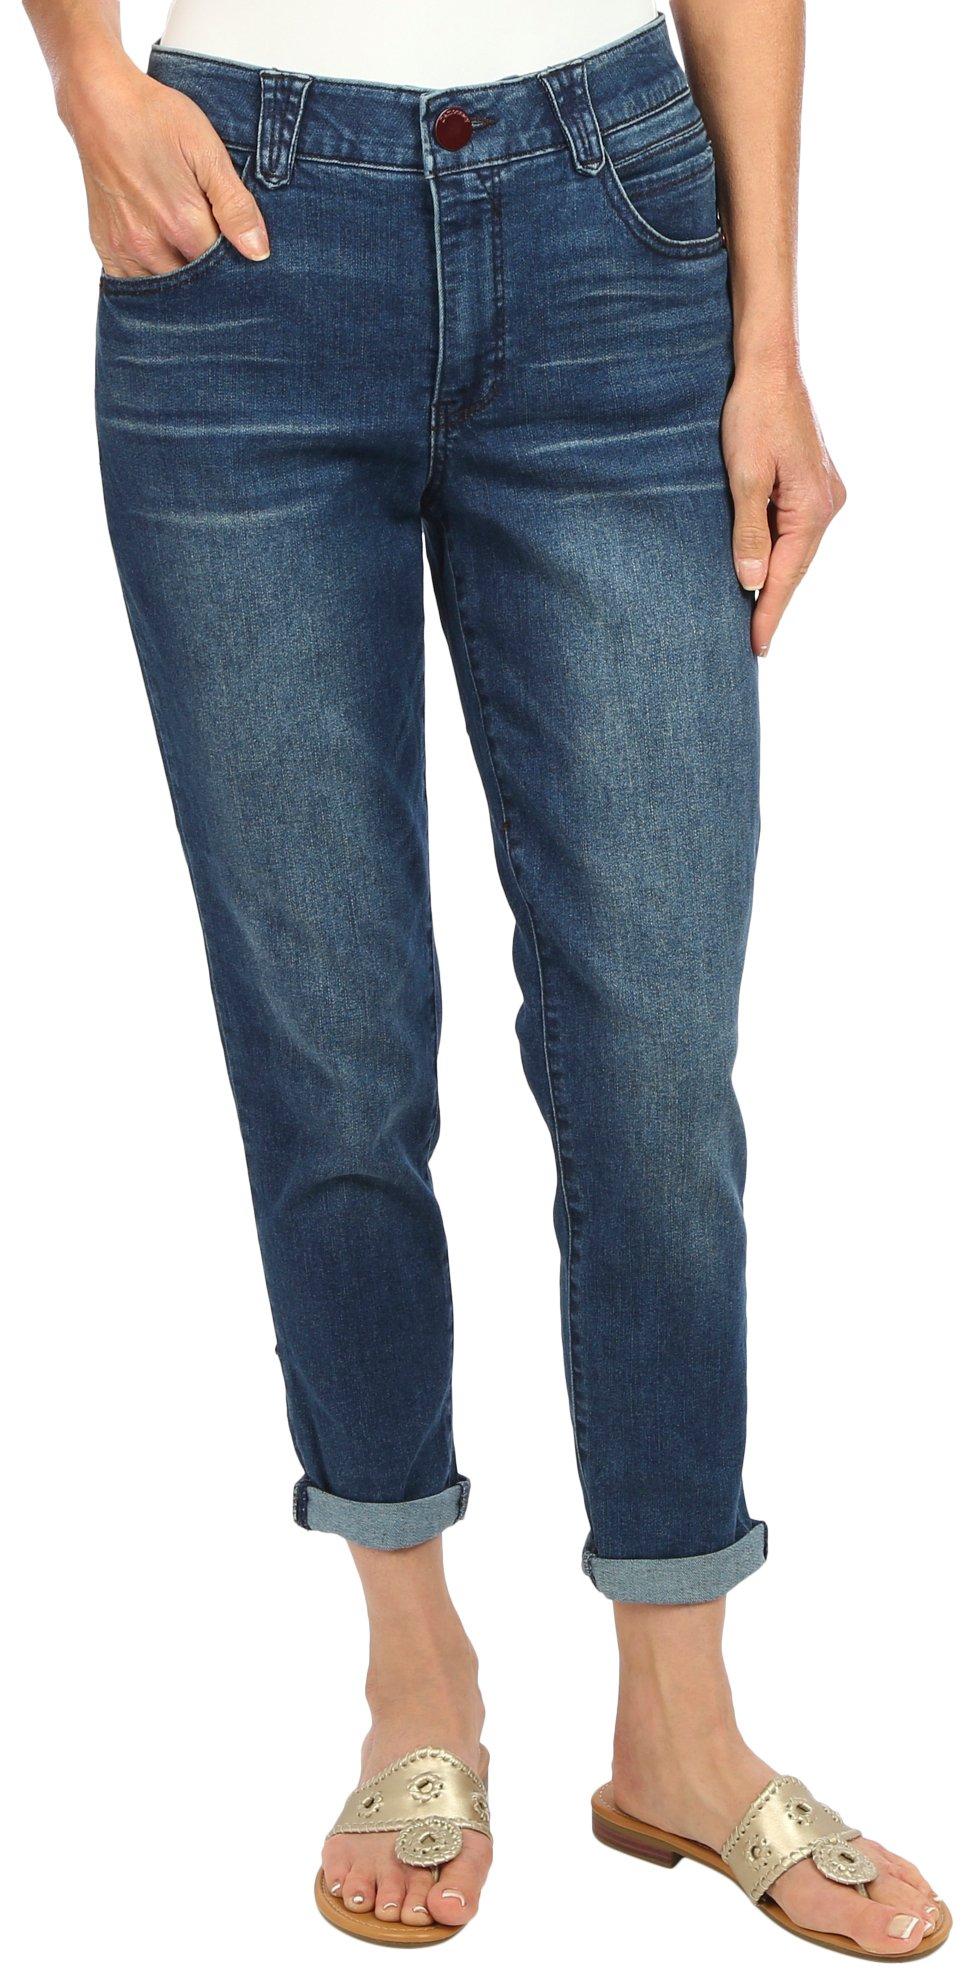 Petite 25 in. Ab Solution Ankle Skimmer Jeans